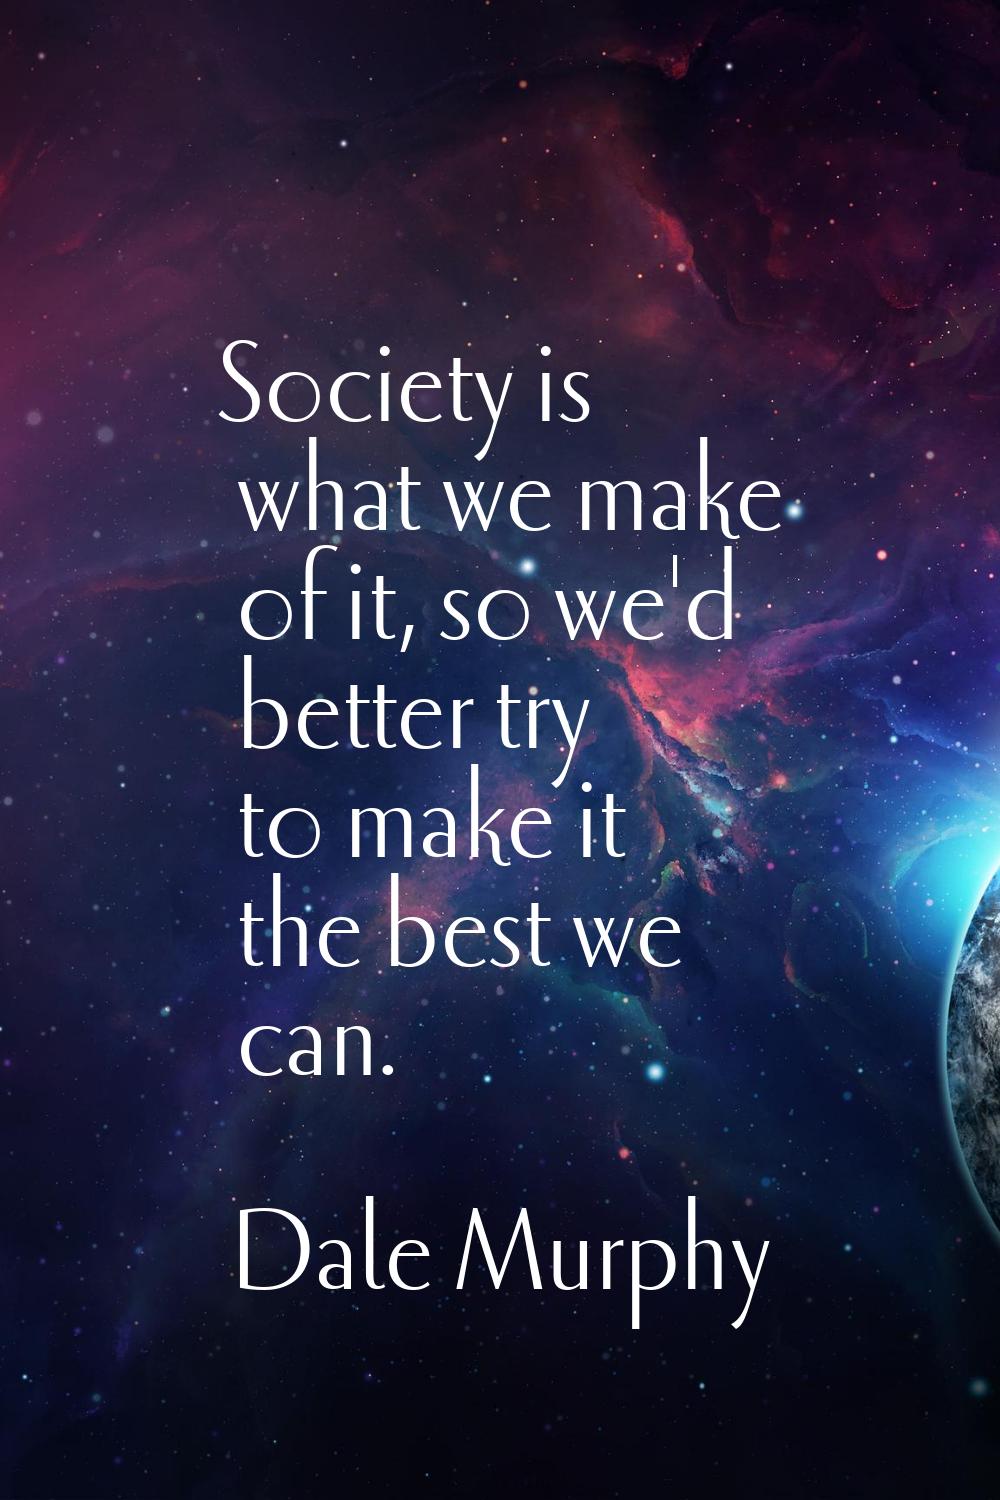 Society is what we make of it, so we'd better try to make it the best we can.